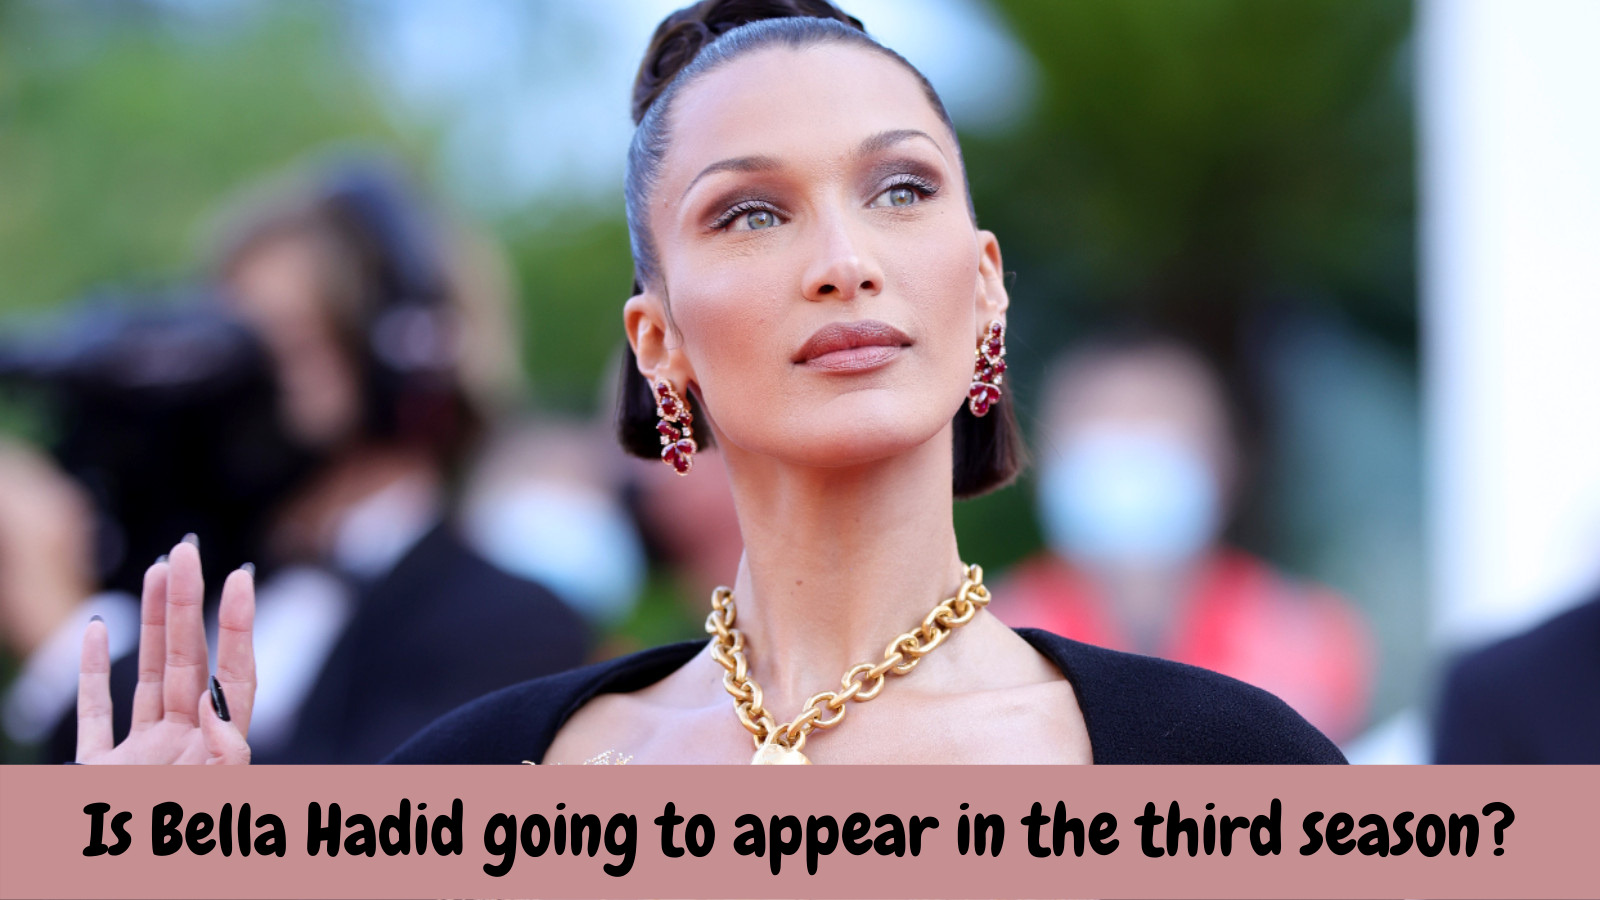 Is Bella Hadid going to appear in the third season?